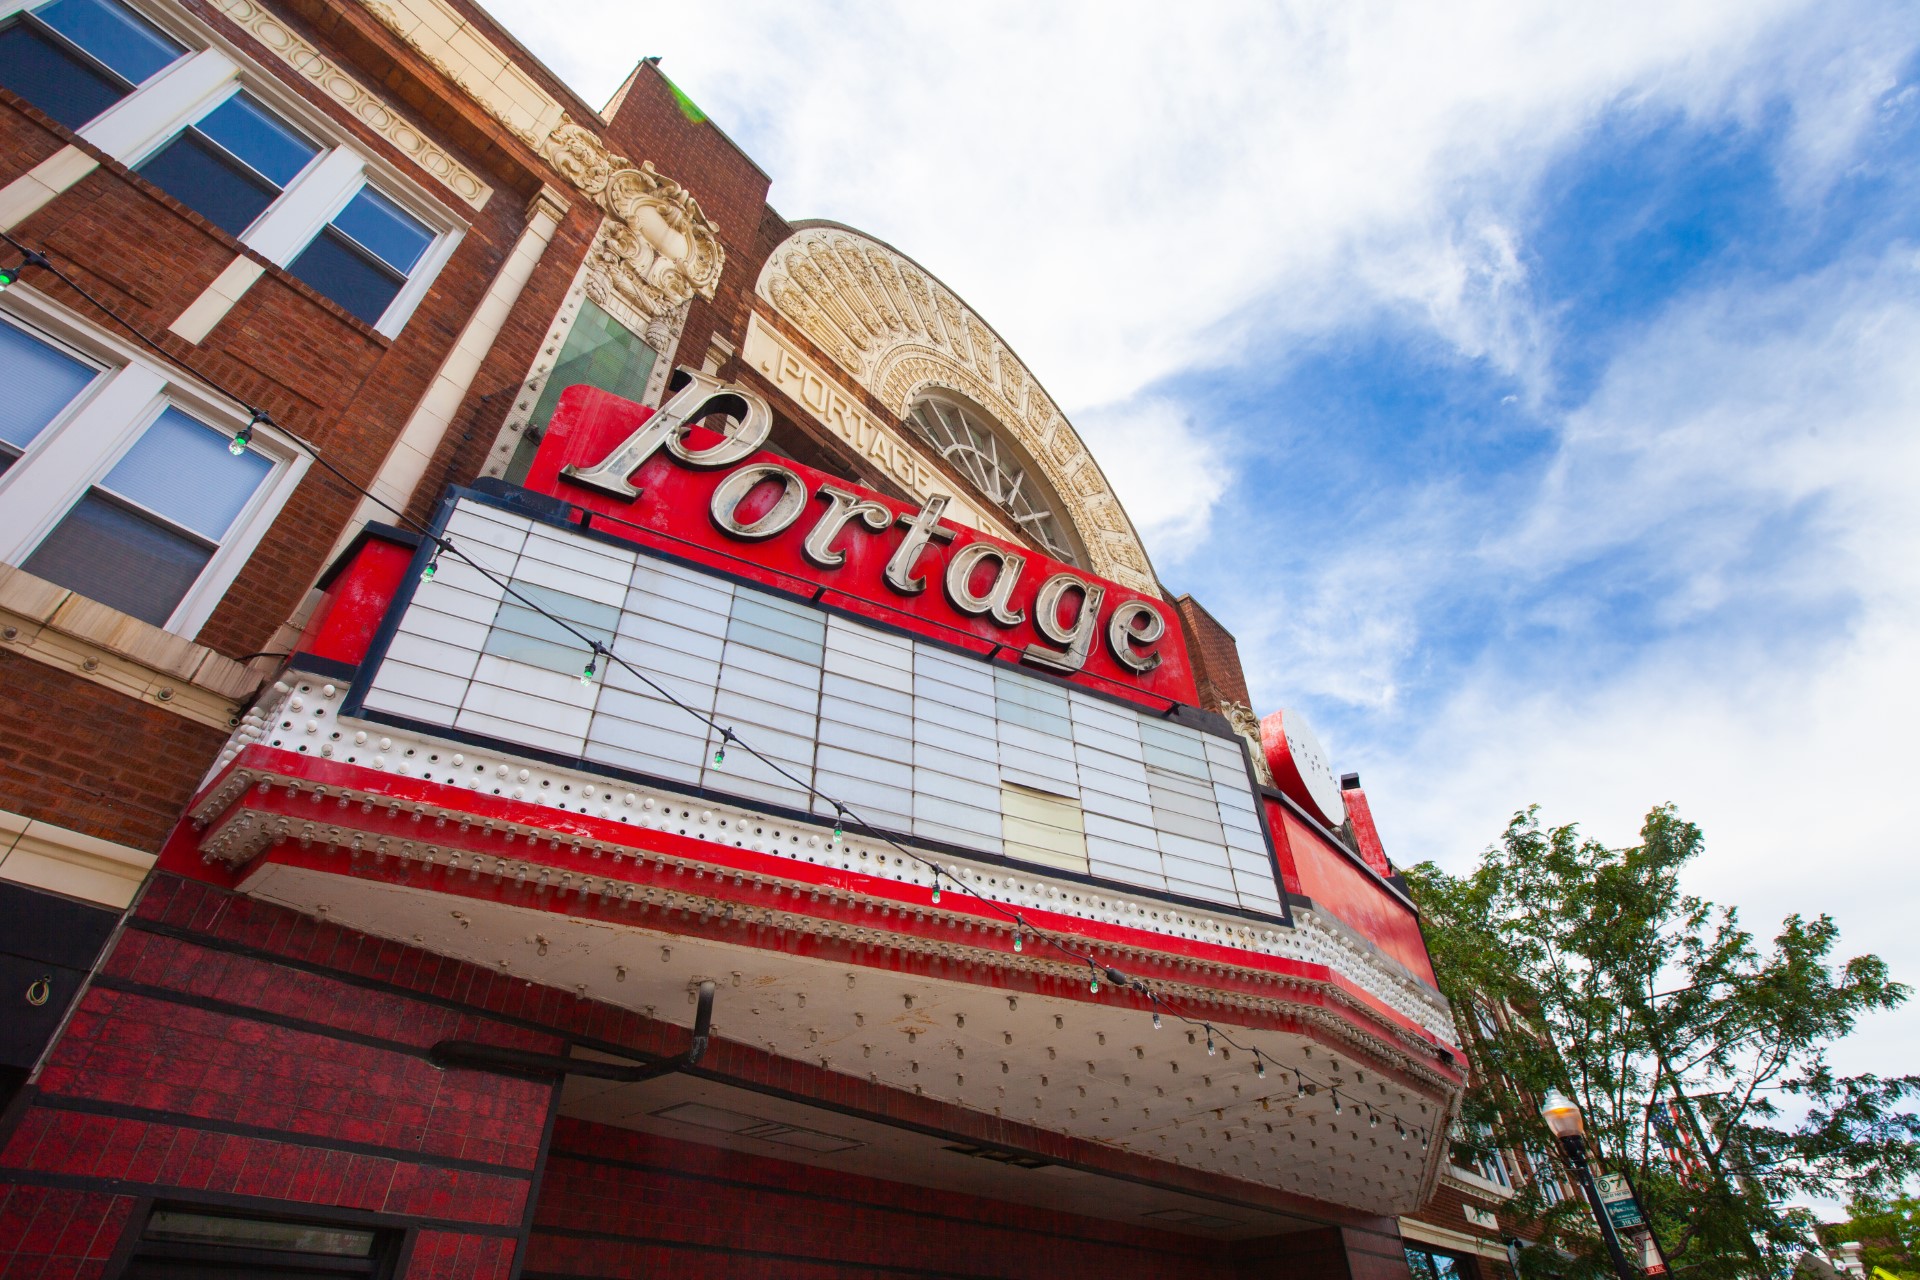 Five Interesting Facts About Chicago’s Portage Theater